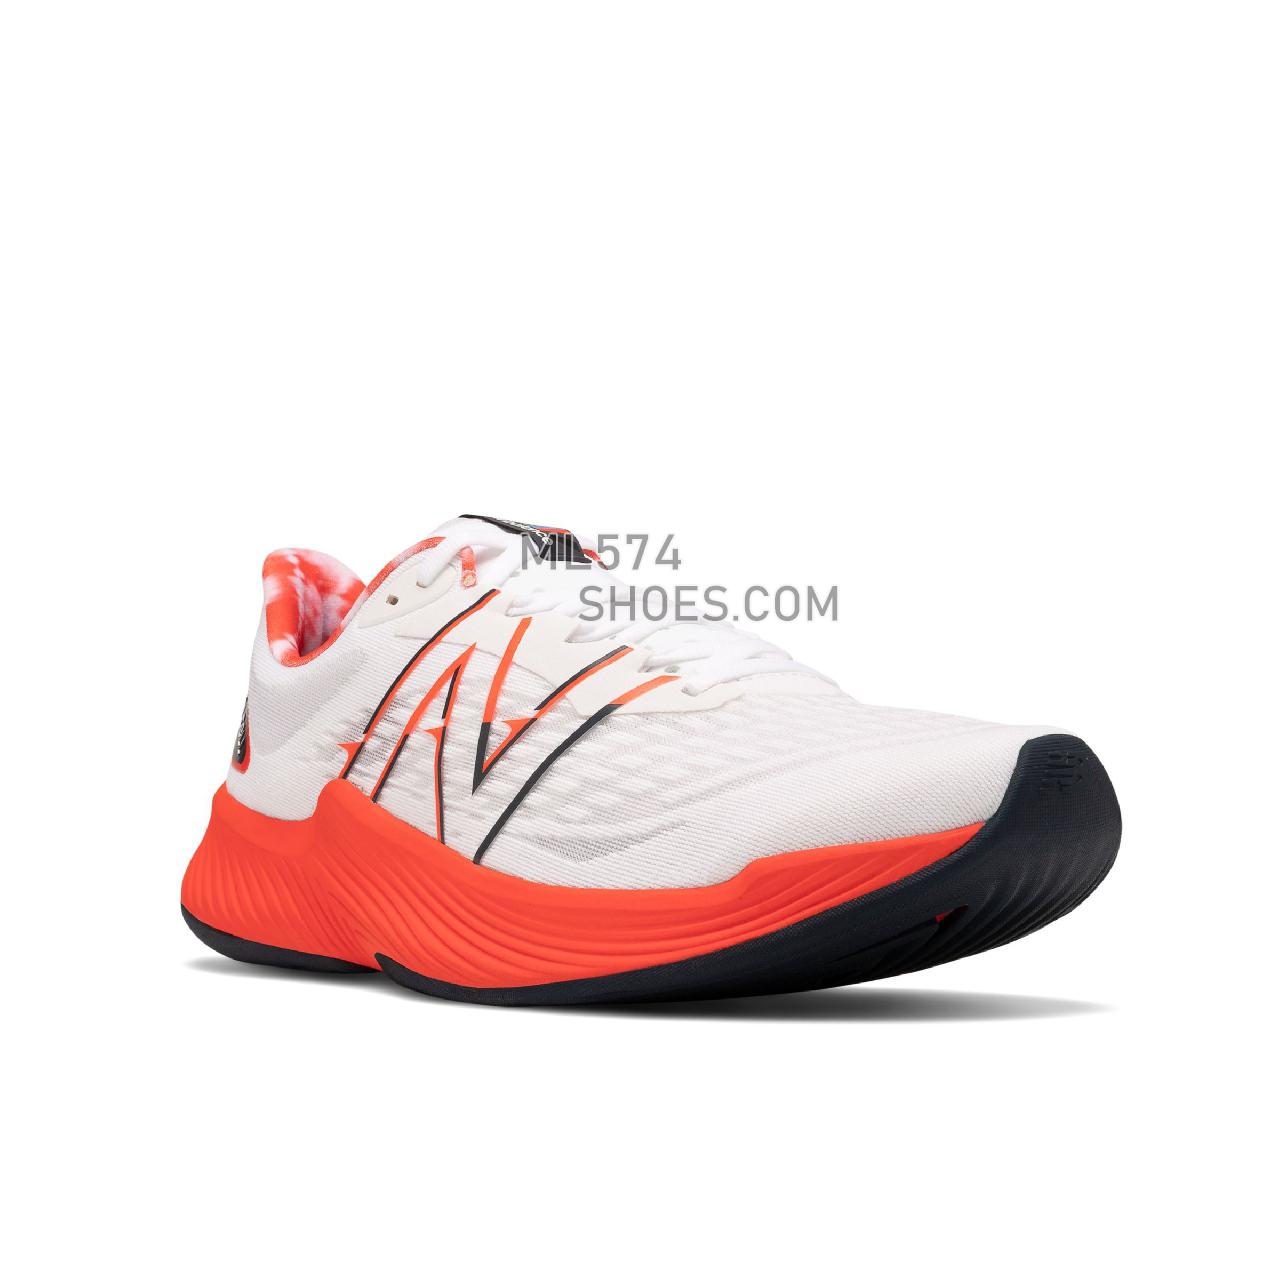 New Balance FuelCell Prism v2 - Men's Stability Running - White with Eclipse - MFCPZZ2